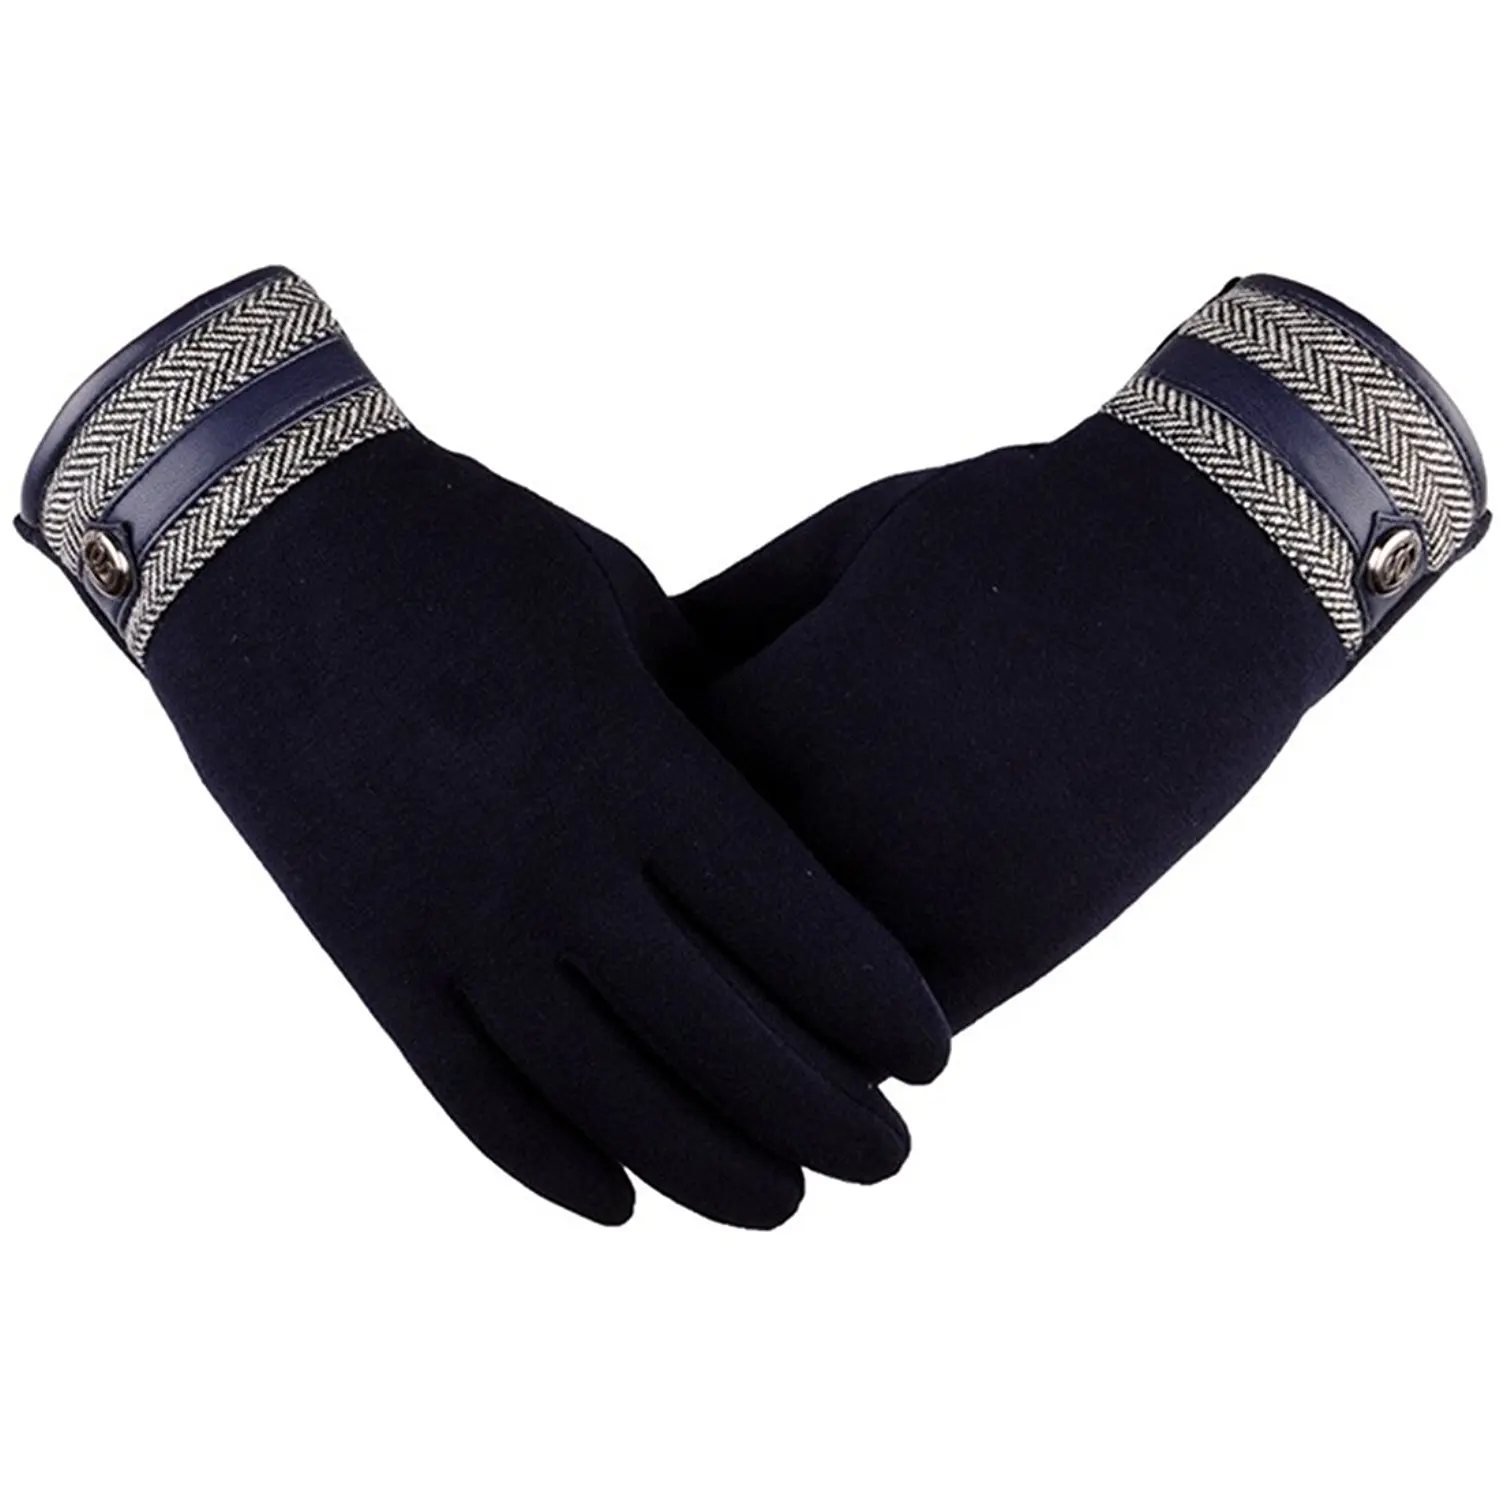 dooolo Winter Gloves,Touch Screen Gloves Touch Gloves Screen Touch Gloves Running Gloves Driving Gloves for Women and Men